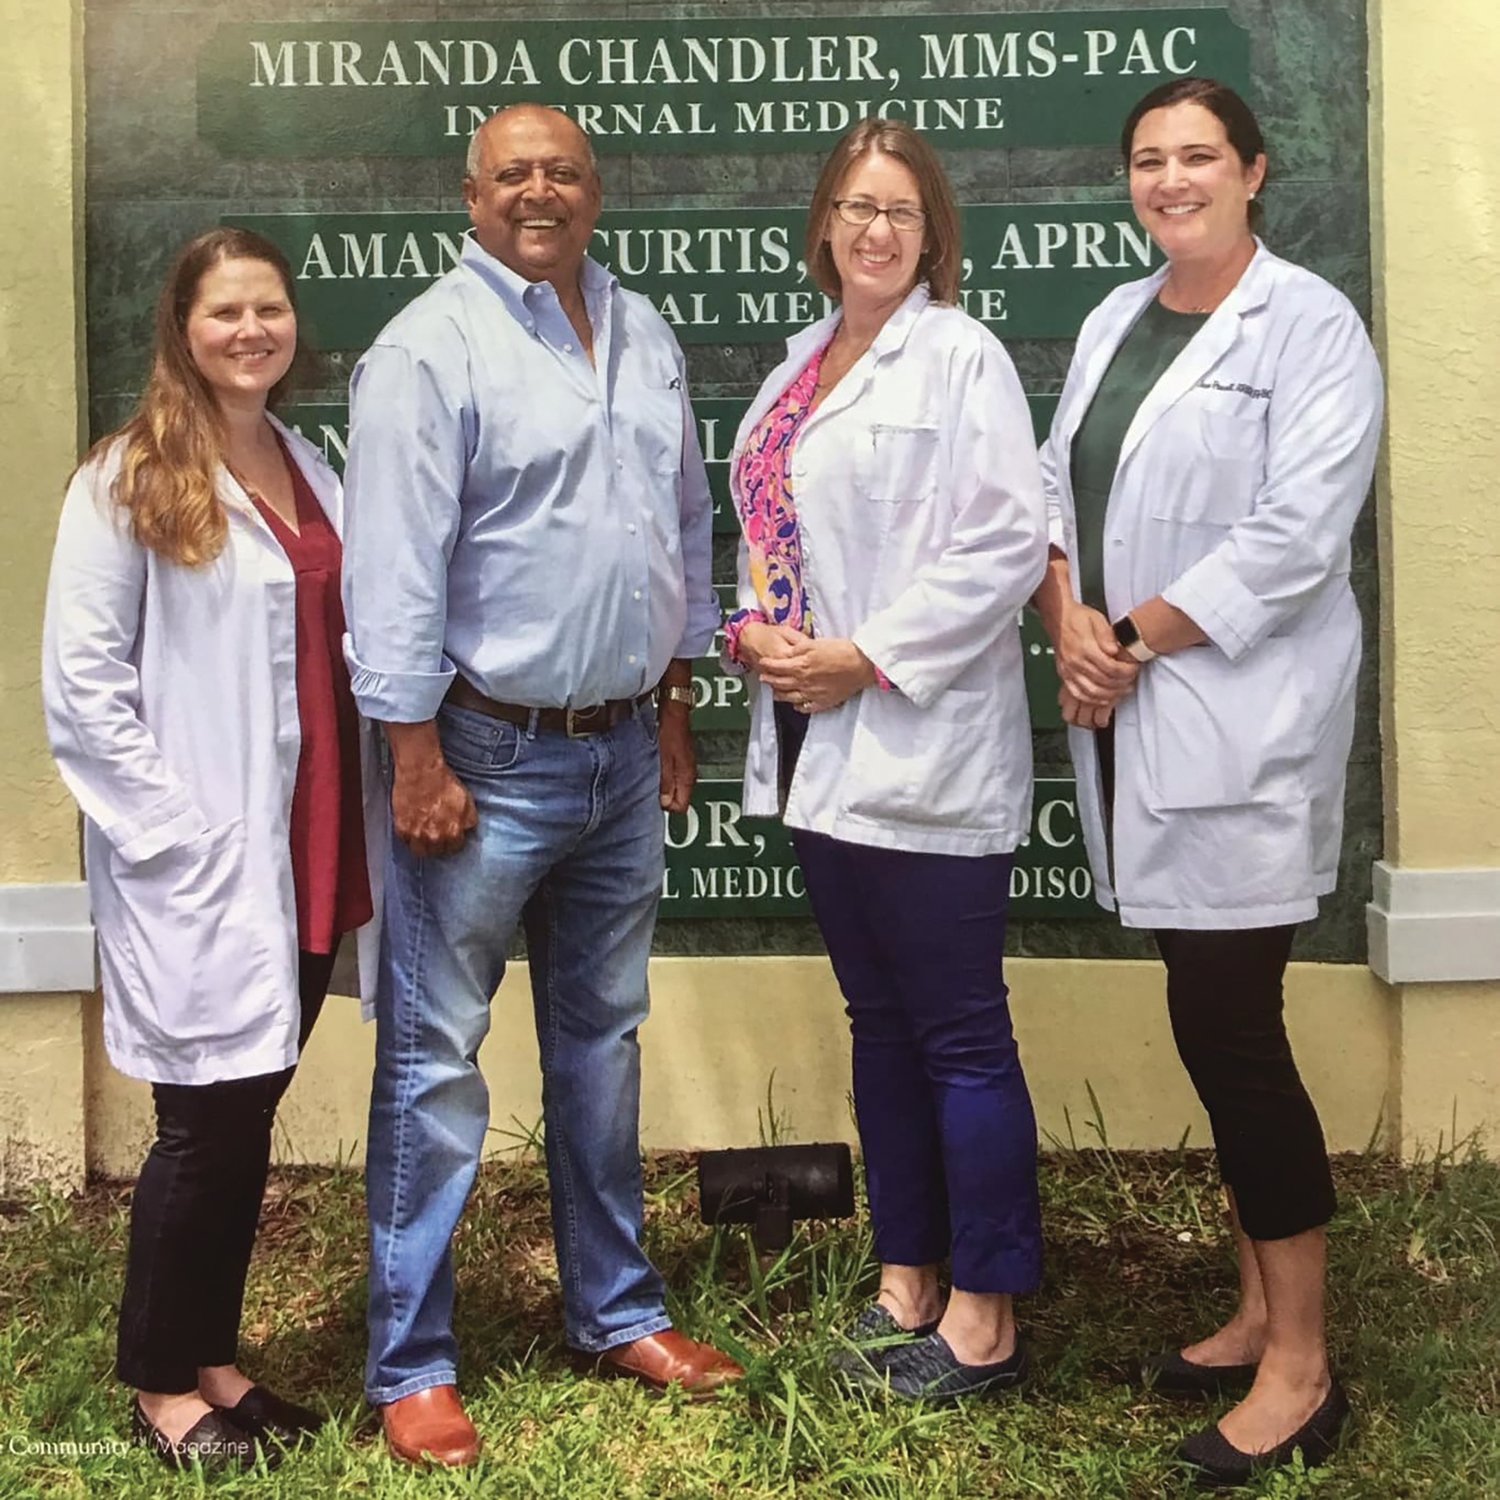 Dr. Saeed Khan is recovering at home after a serious bout with COVID-19. Pictured left to right are Miranda Chandler, Khan, Amanda Curtis and Jane Powell.